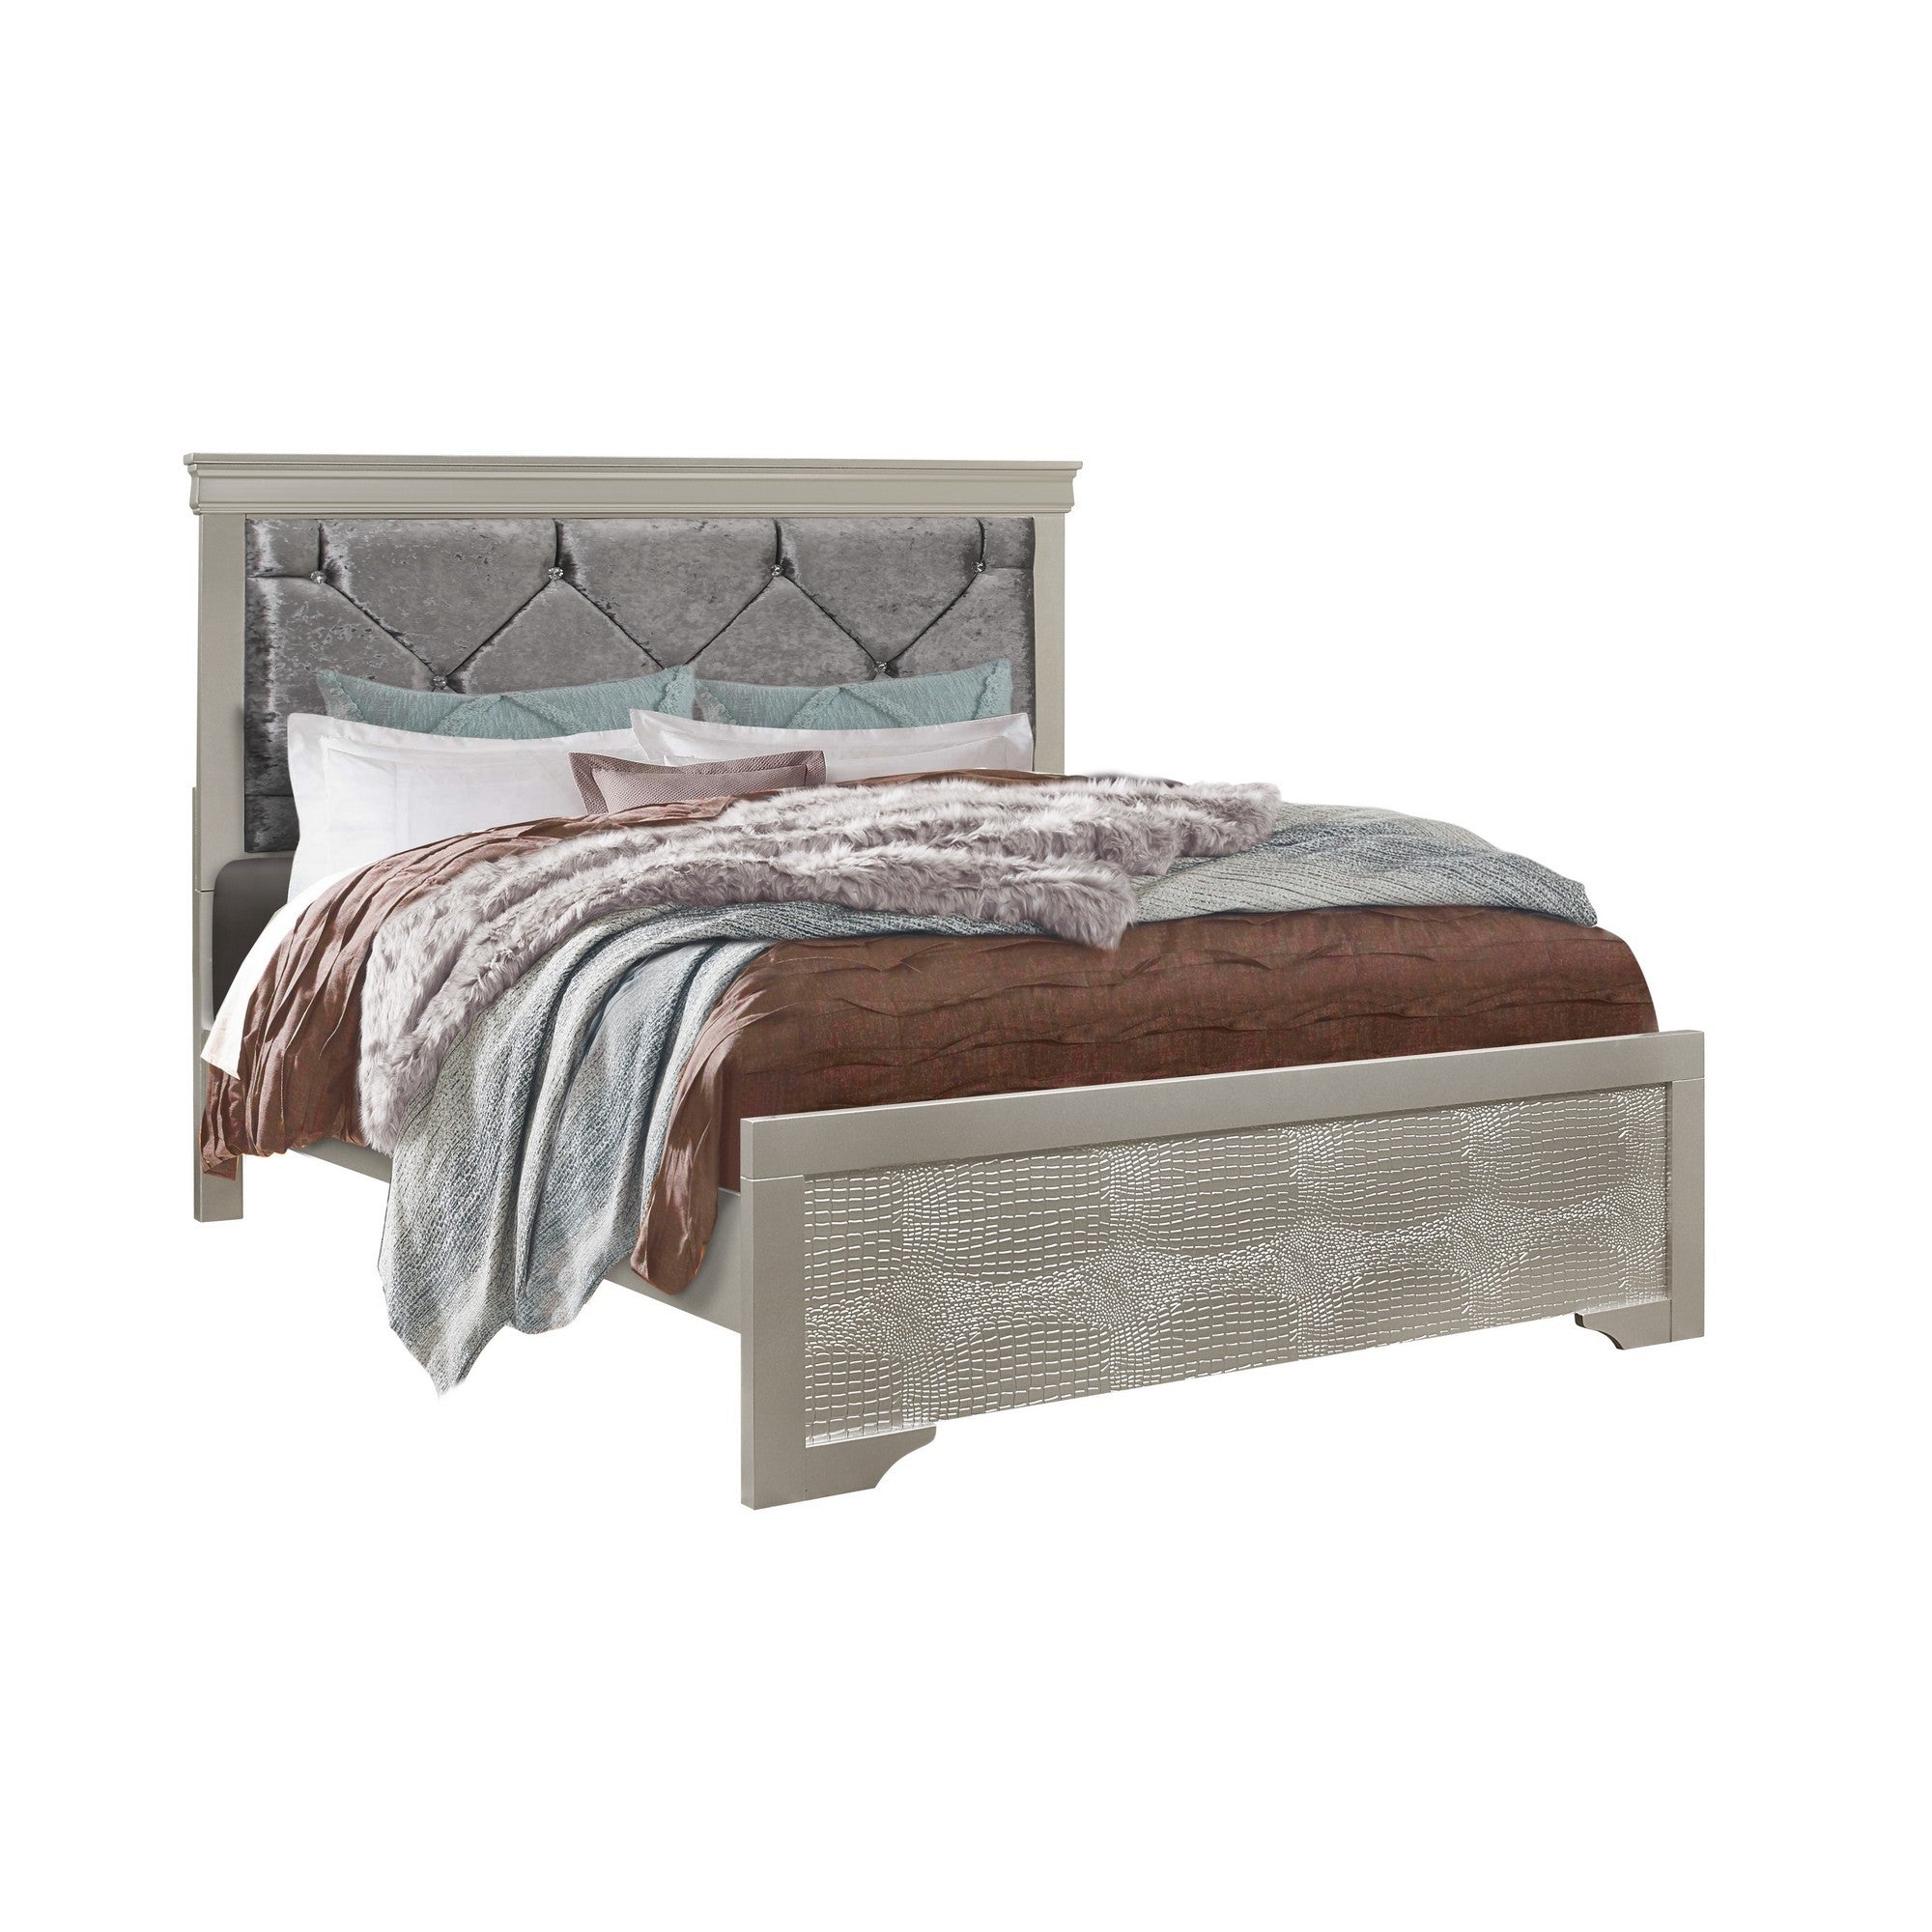 Silver Tone Rubberwood Queen Bed with Clean Line Headboard and Footboard